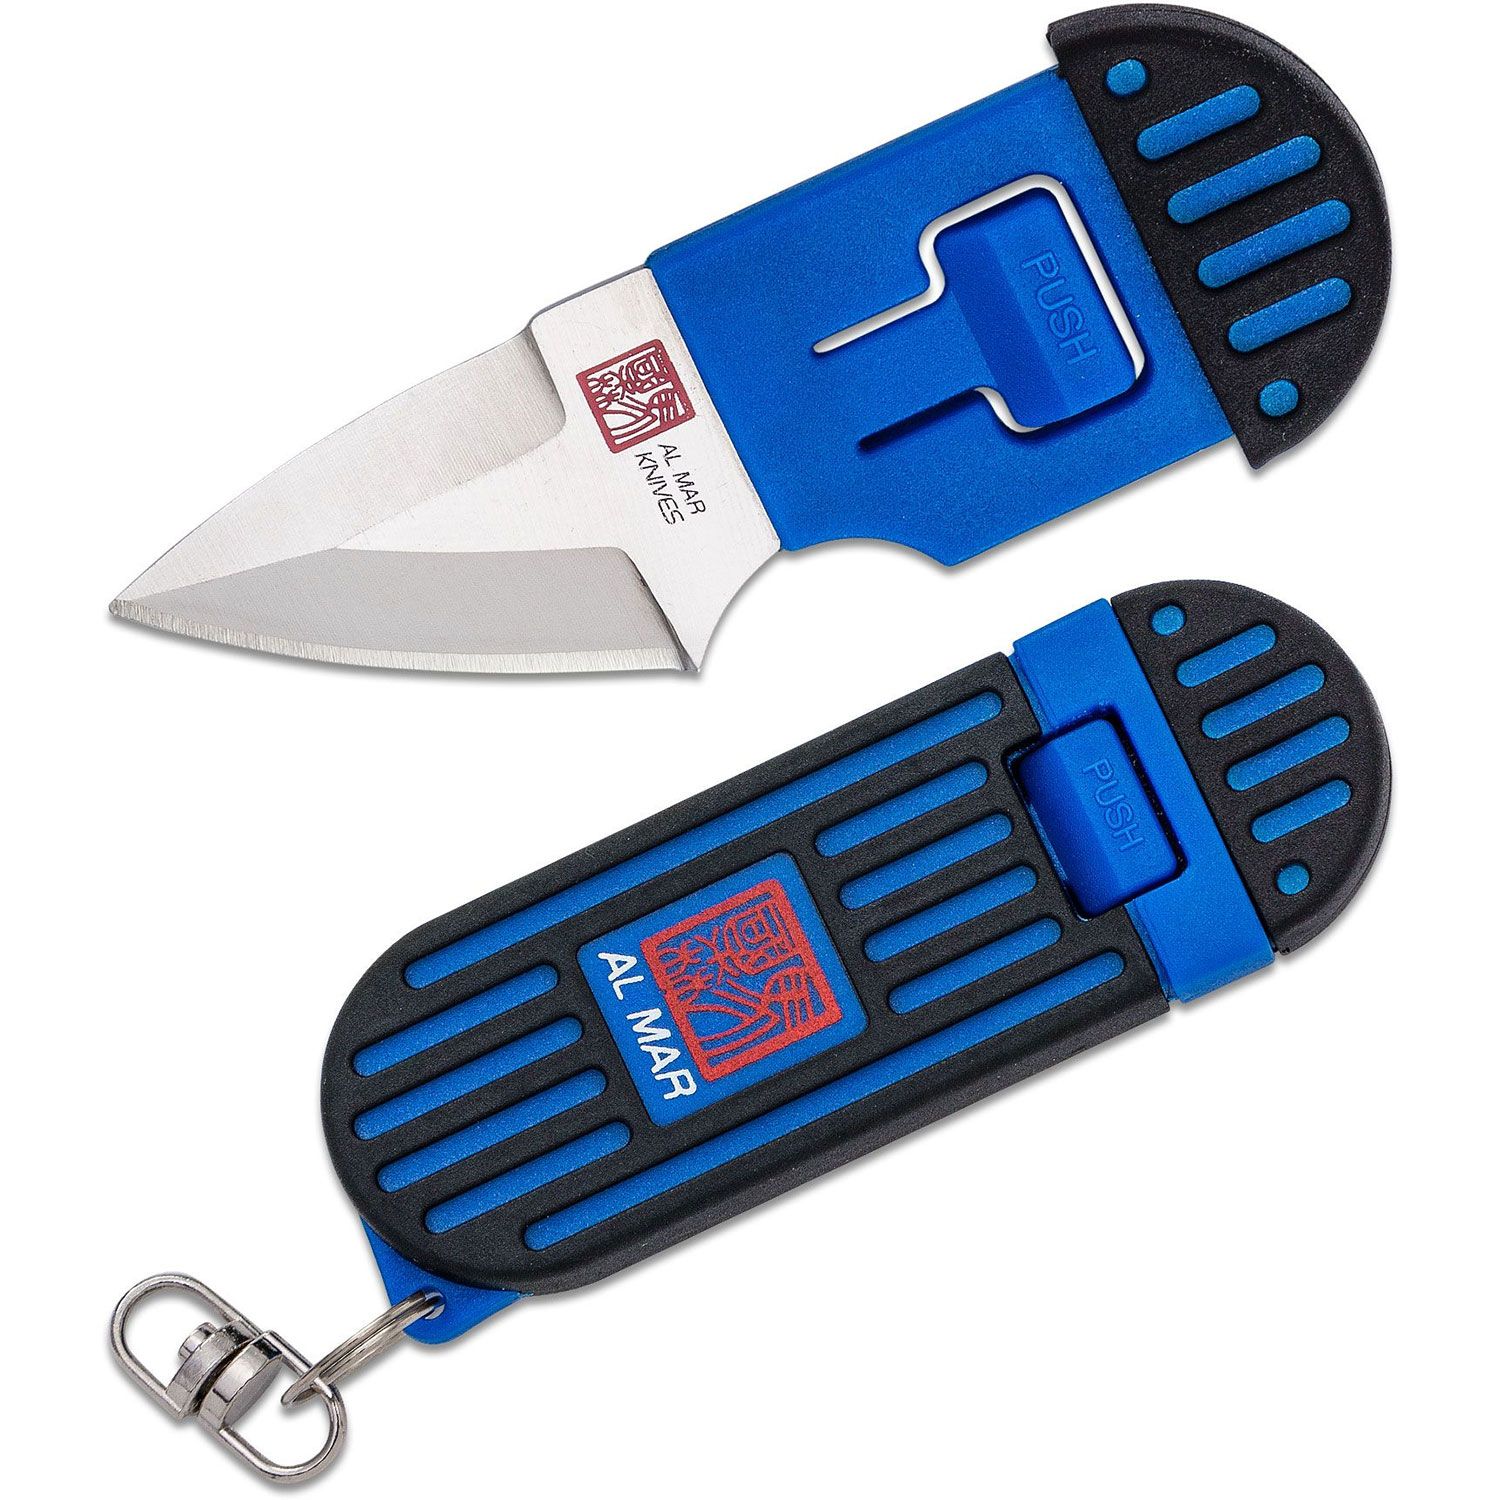 Shop for and Buy Alpine Pocket Knife Keychain - Five Function at .  Large selection and bulk discounts available.